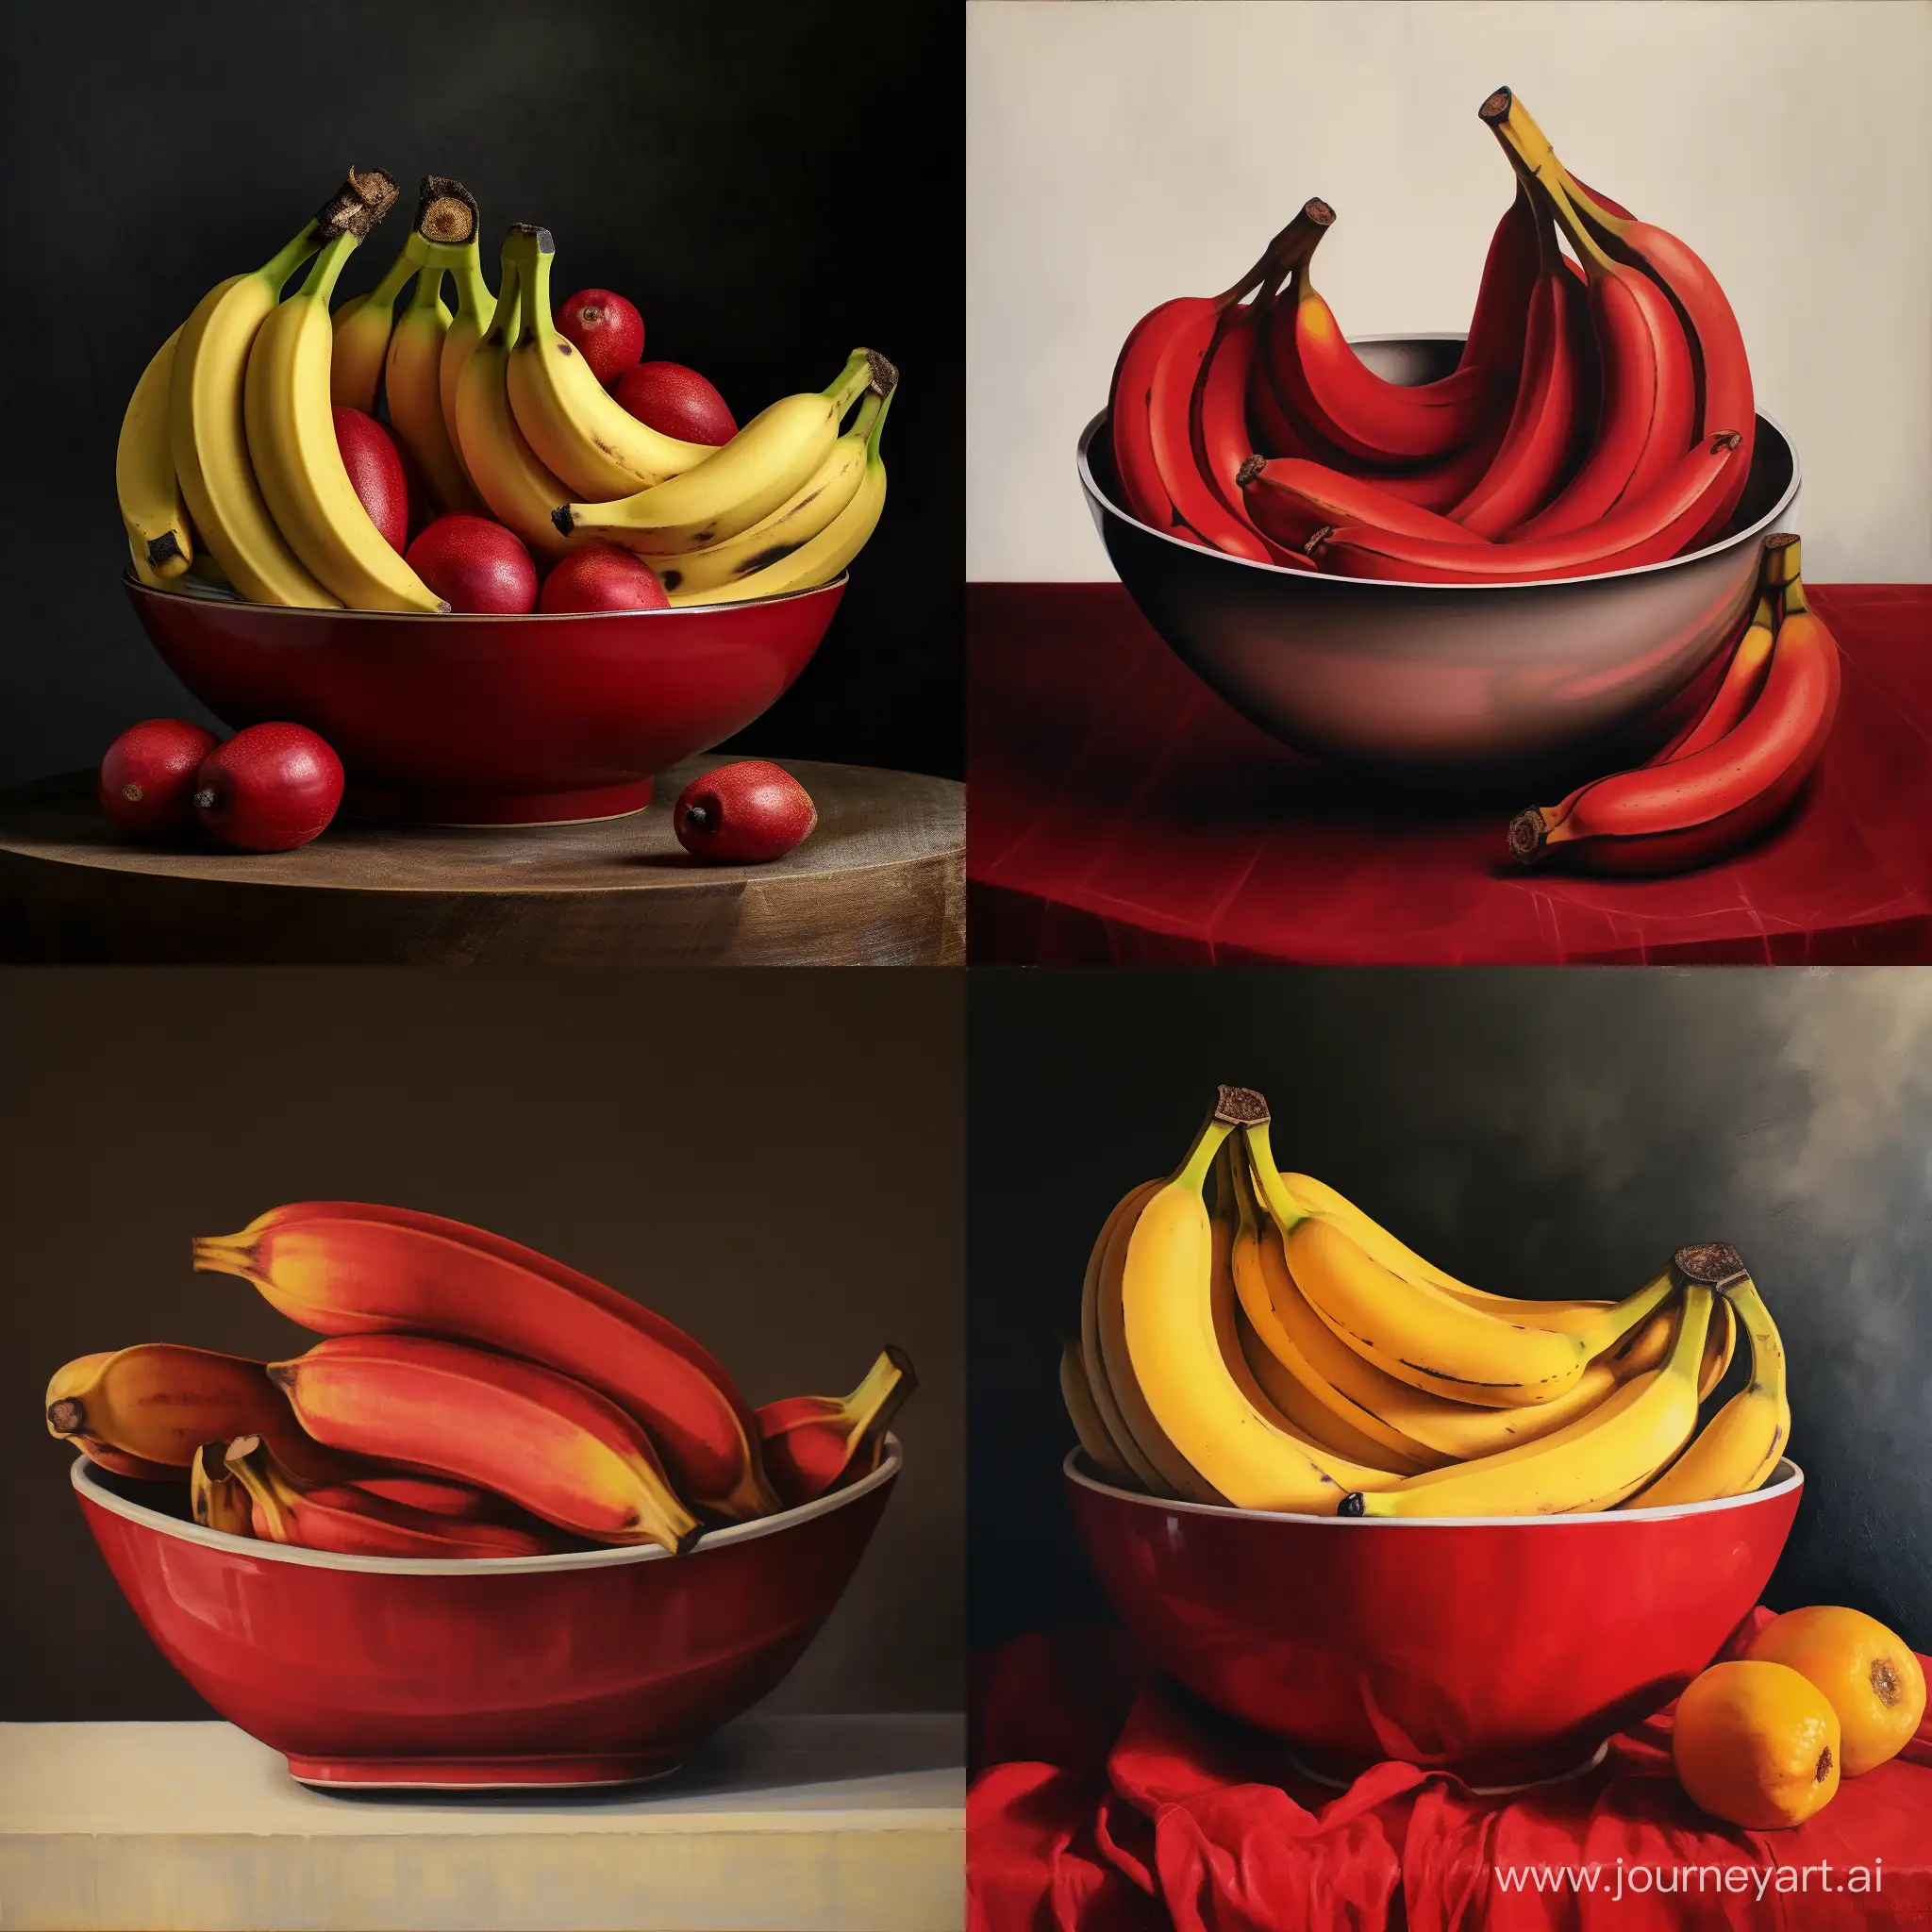 Vibrant-Red-Bananas-Arranged-in-a-Bowl